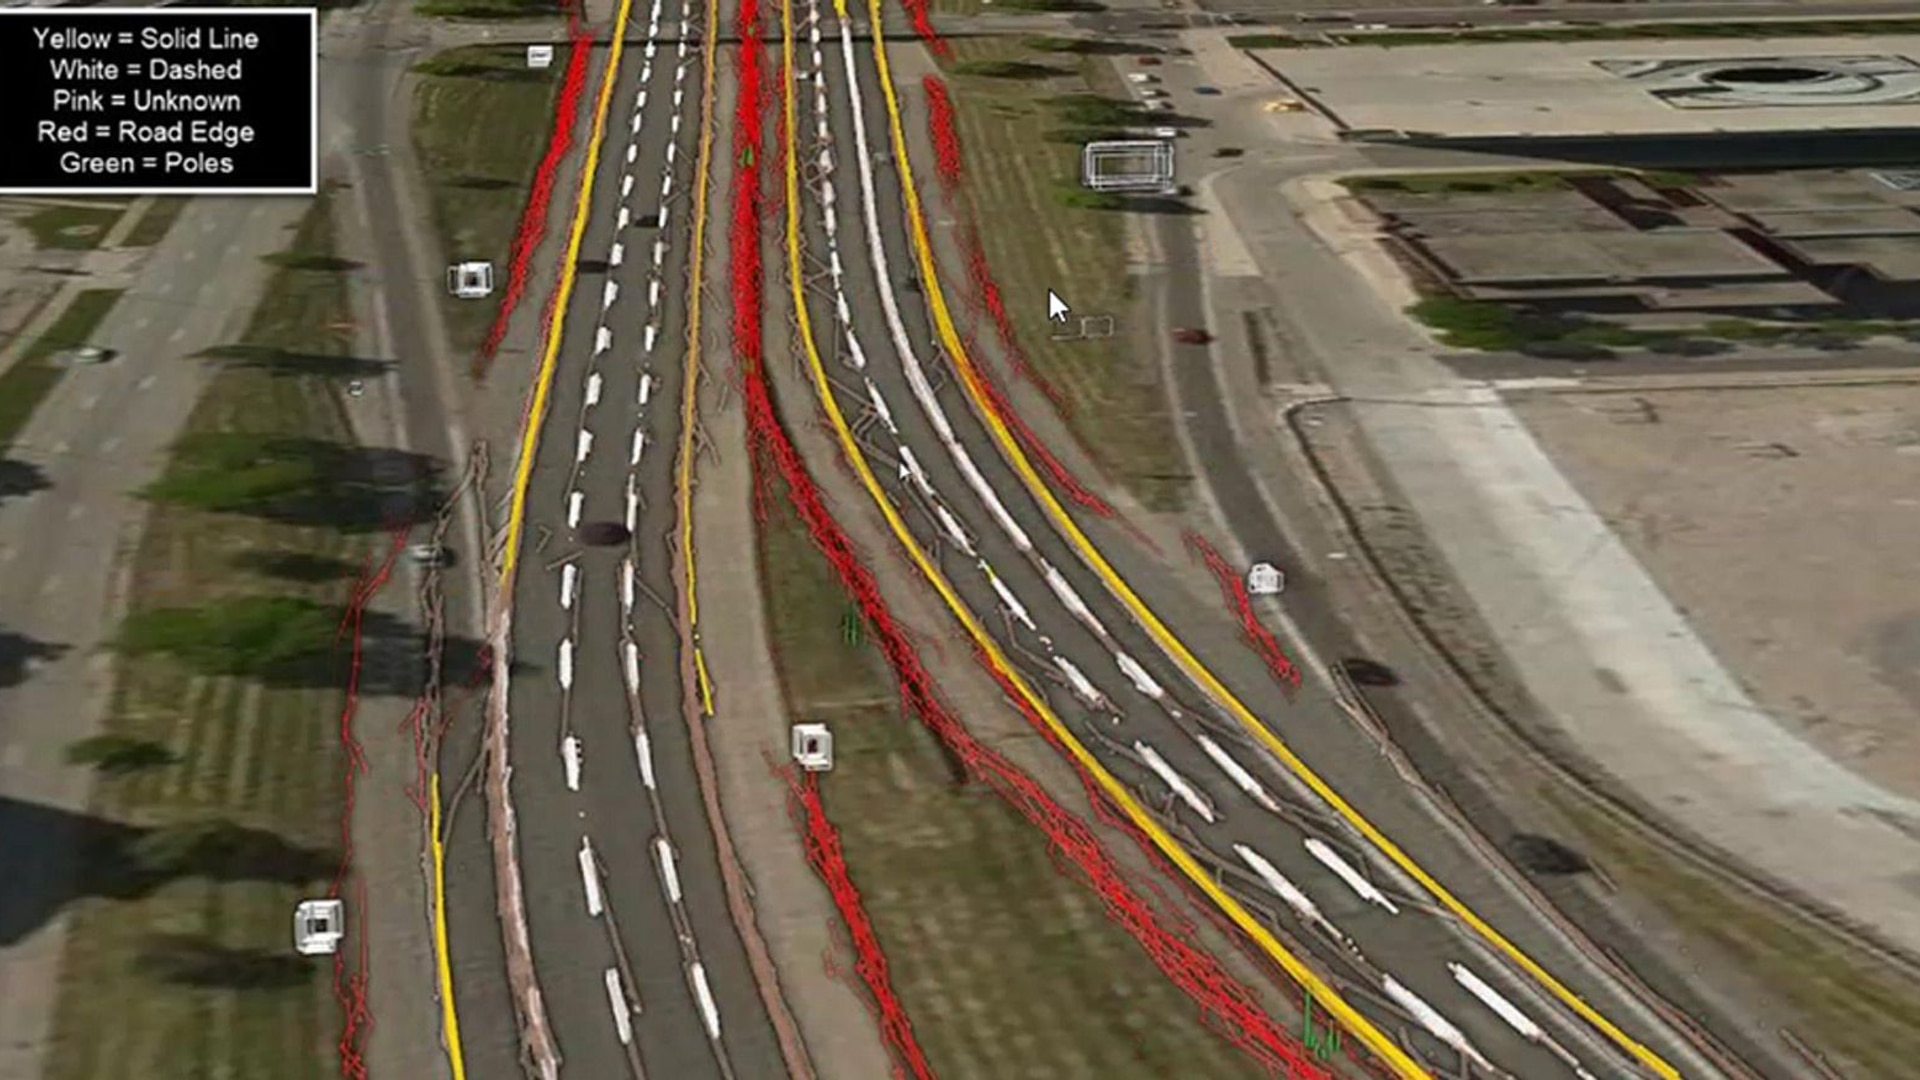 Highly detailed maps for self-driving cars created by satellite imagery